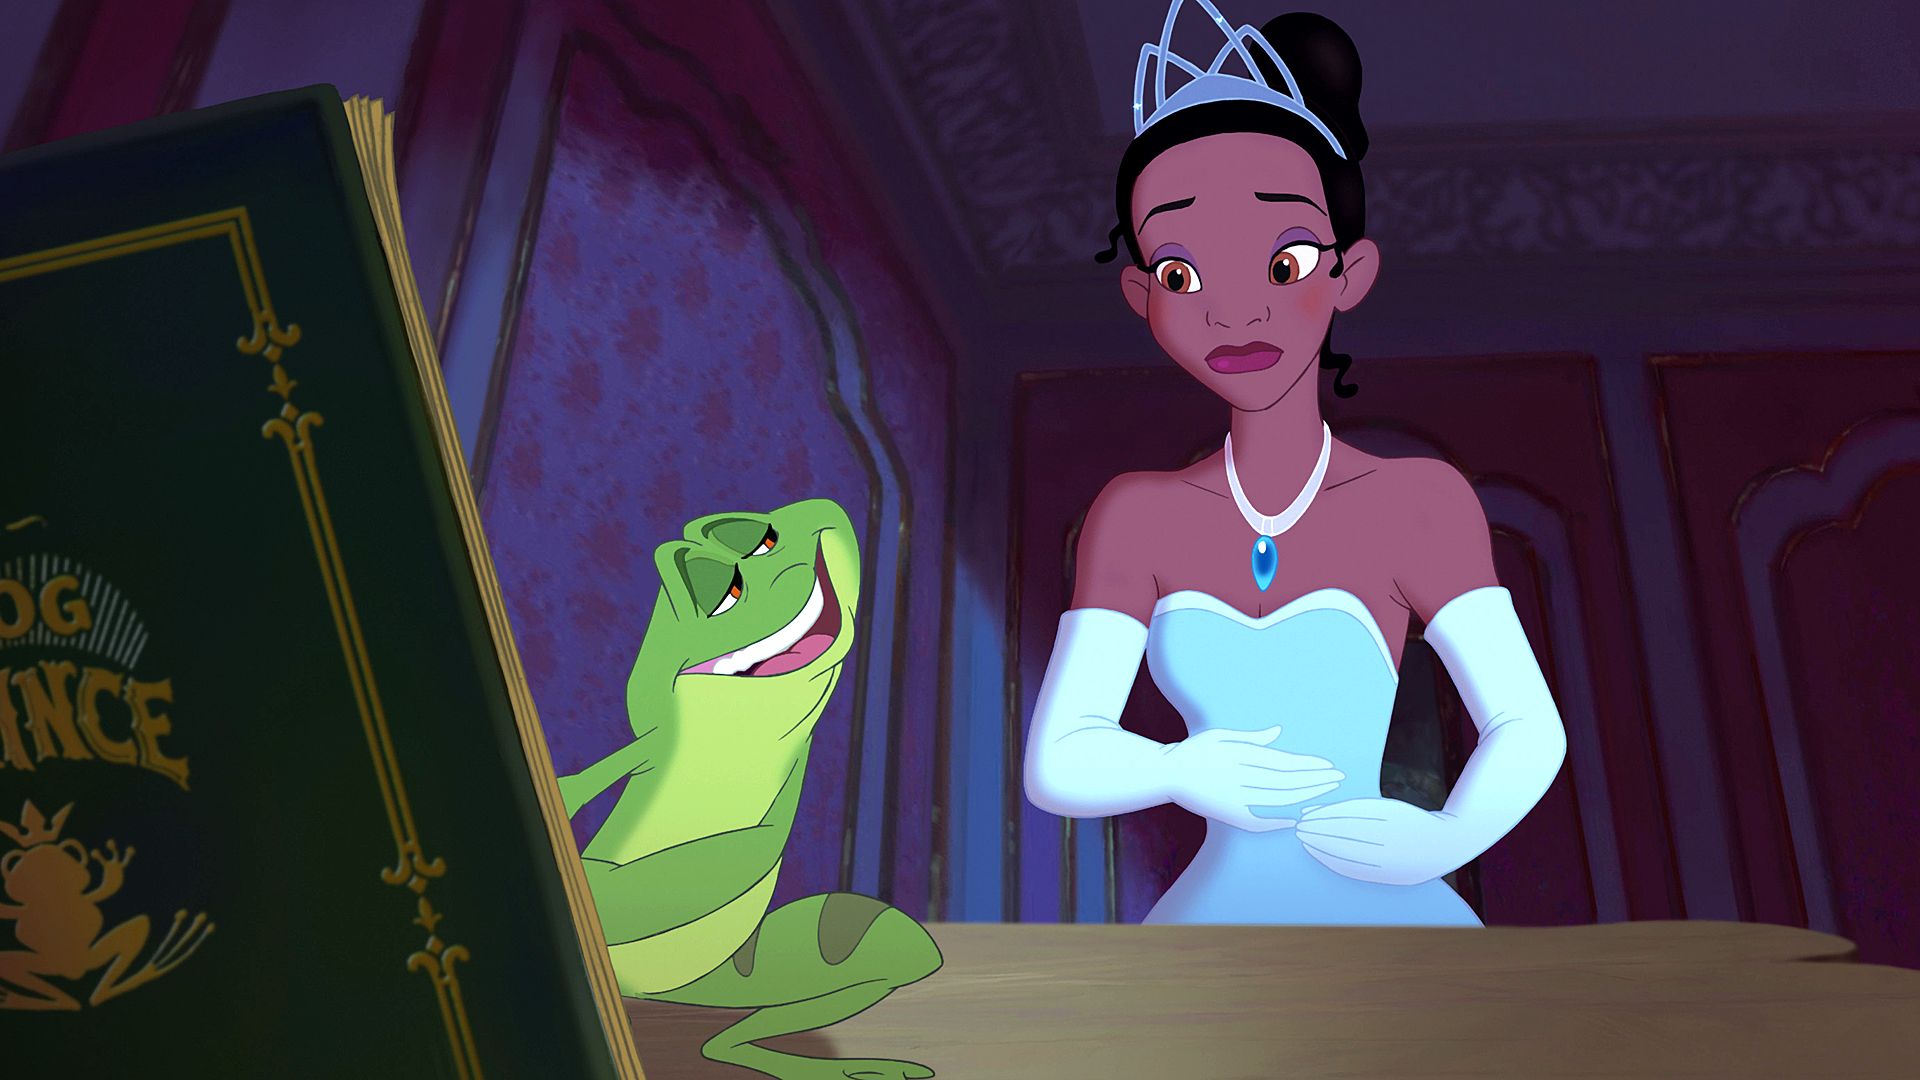 A still from animated The Princess and the Frog